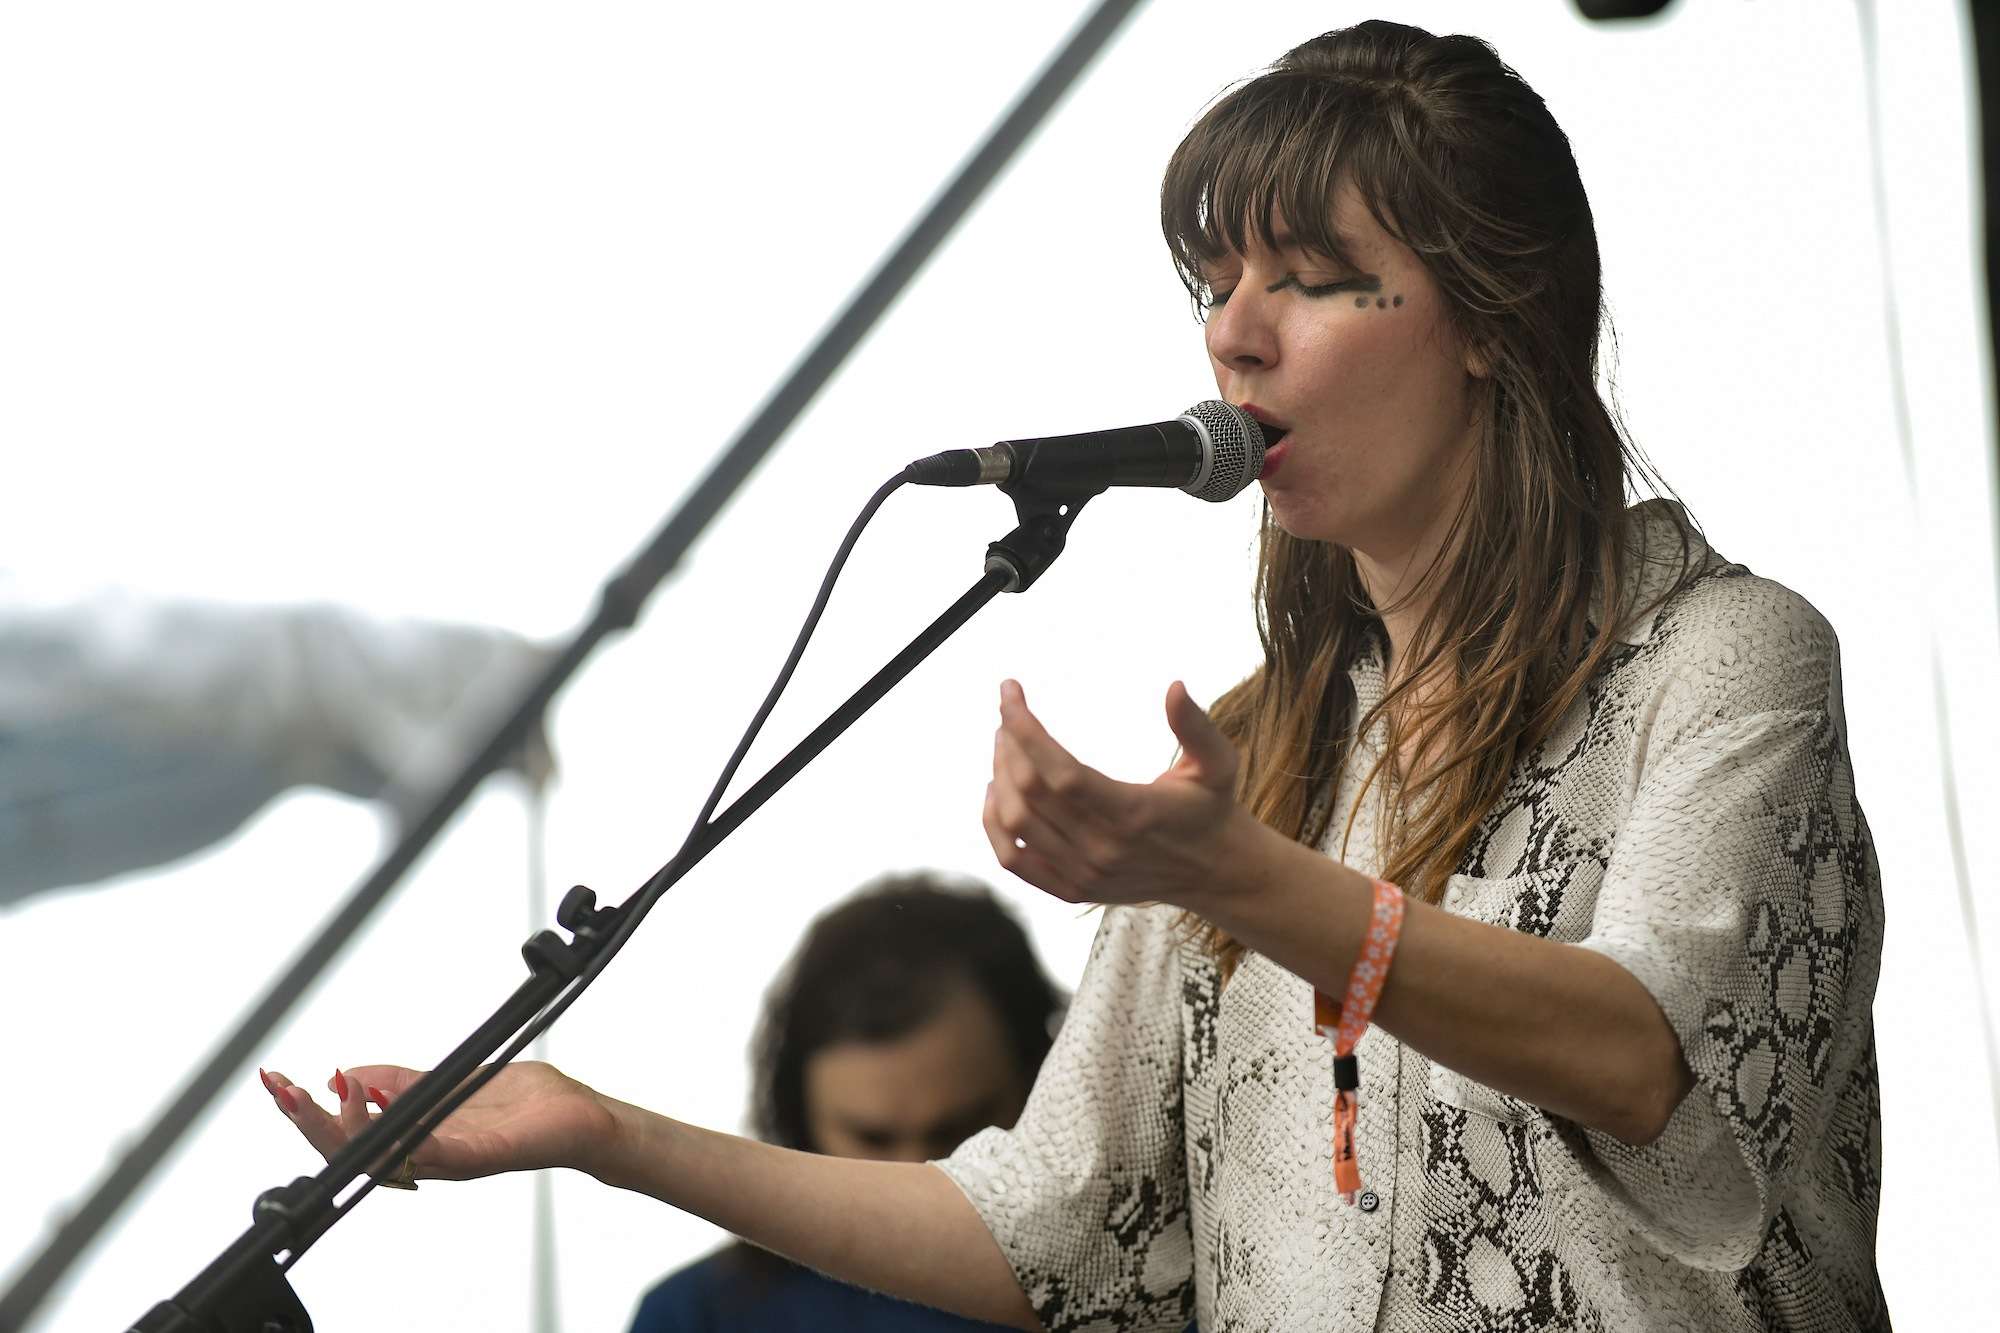 Circuit des Yeux Live at Pitchfork [GALLERY] 5